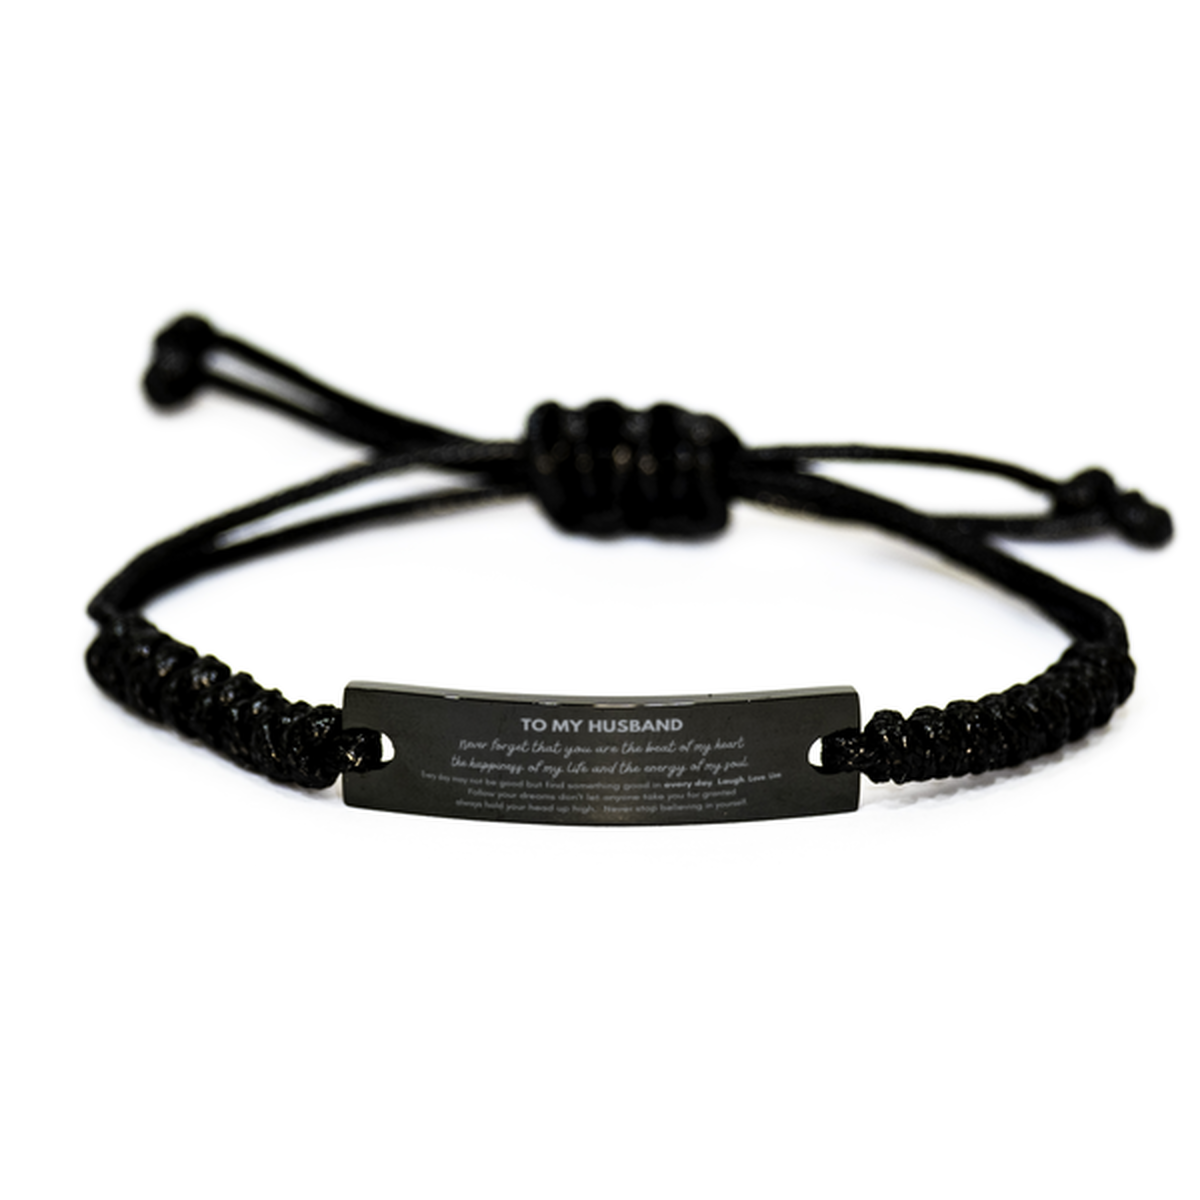 To My Husband Bracelet Gifts, Christmas Husband Black Rope Bracelet Present, Birthday Unique Motivational For Husband, To My Husband Never forget that you are the beat of my heart the happiness of my life and the energy of my soul